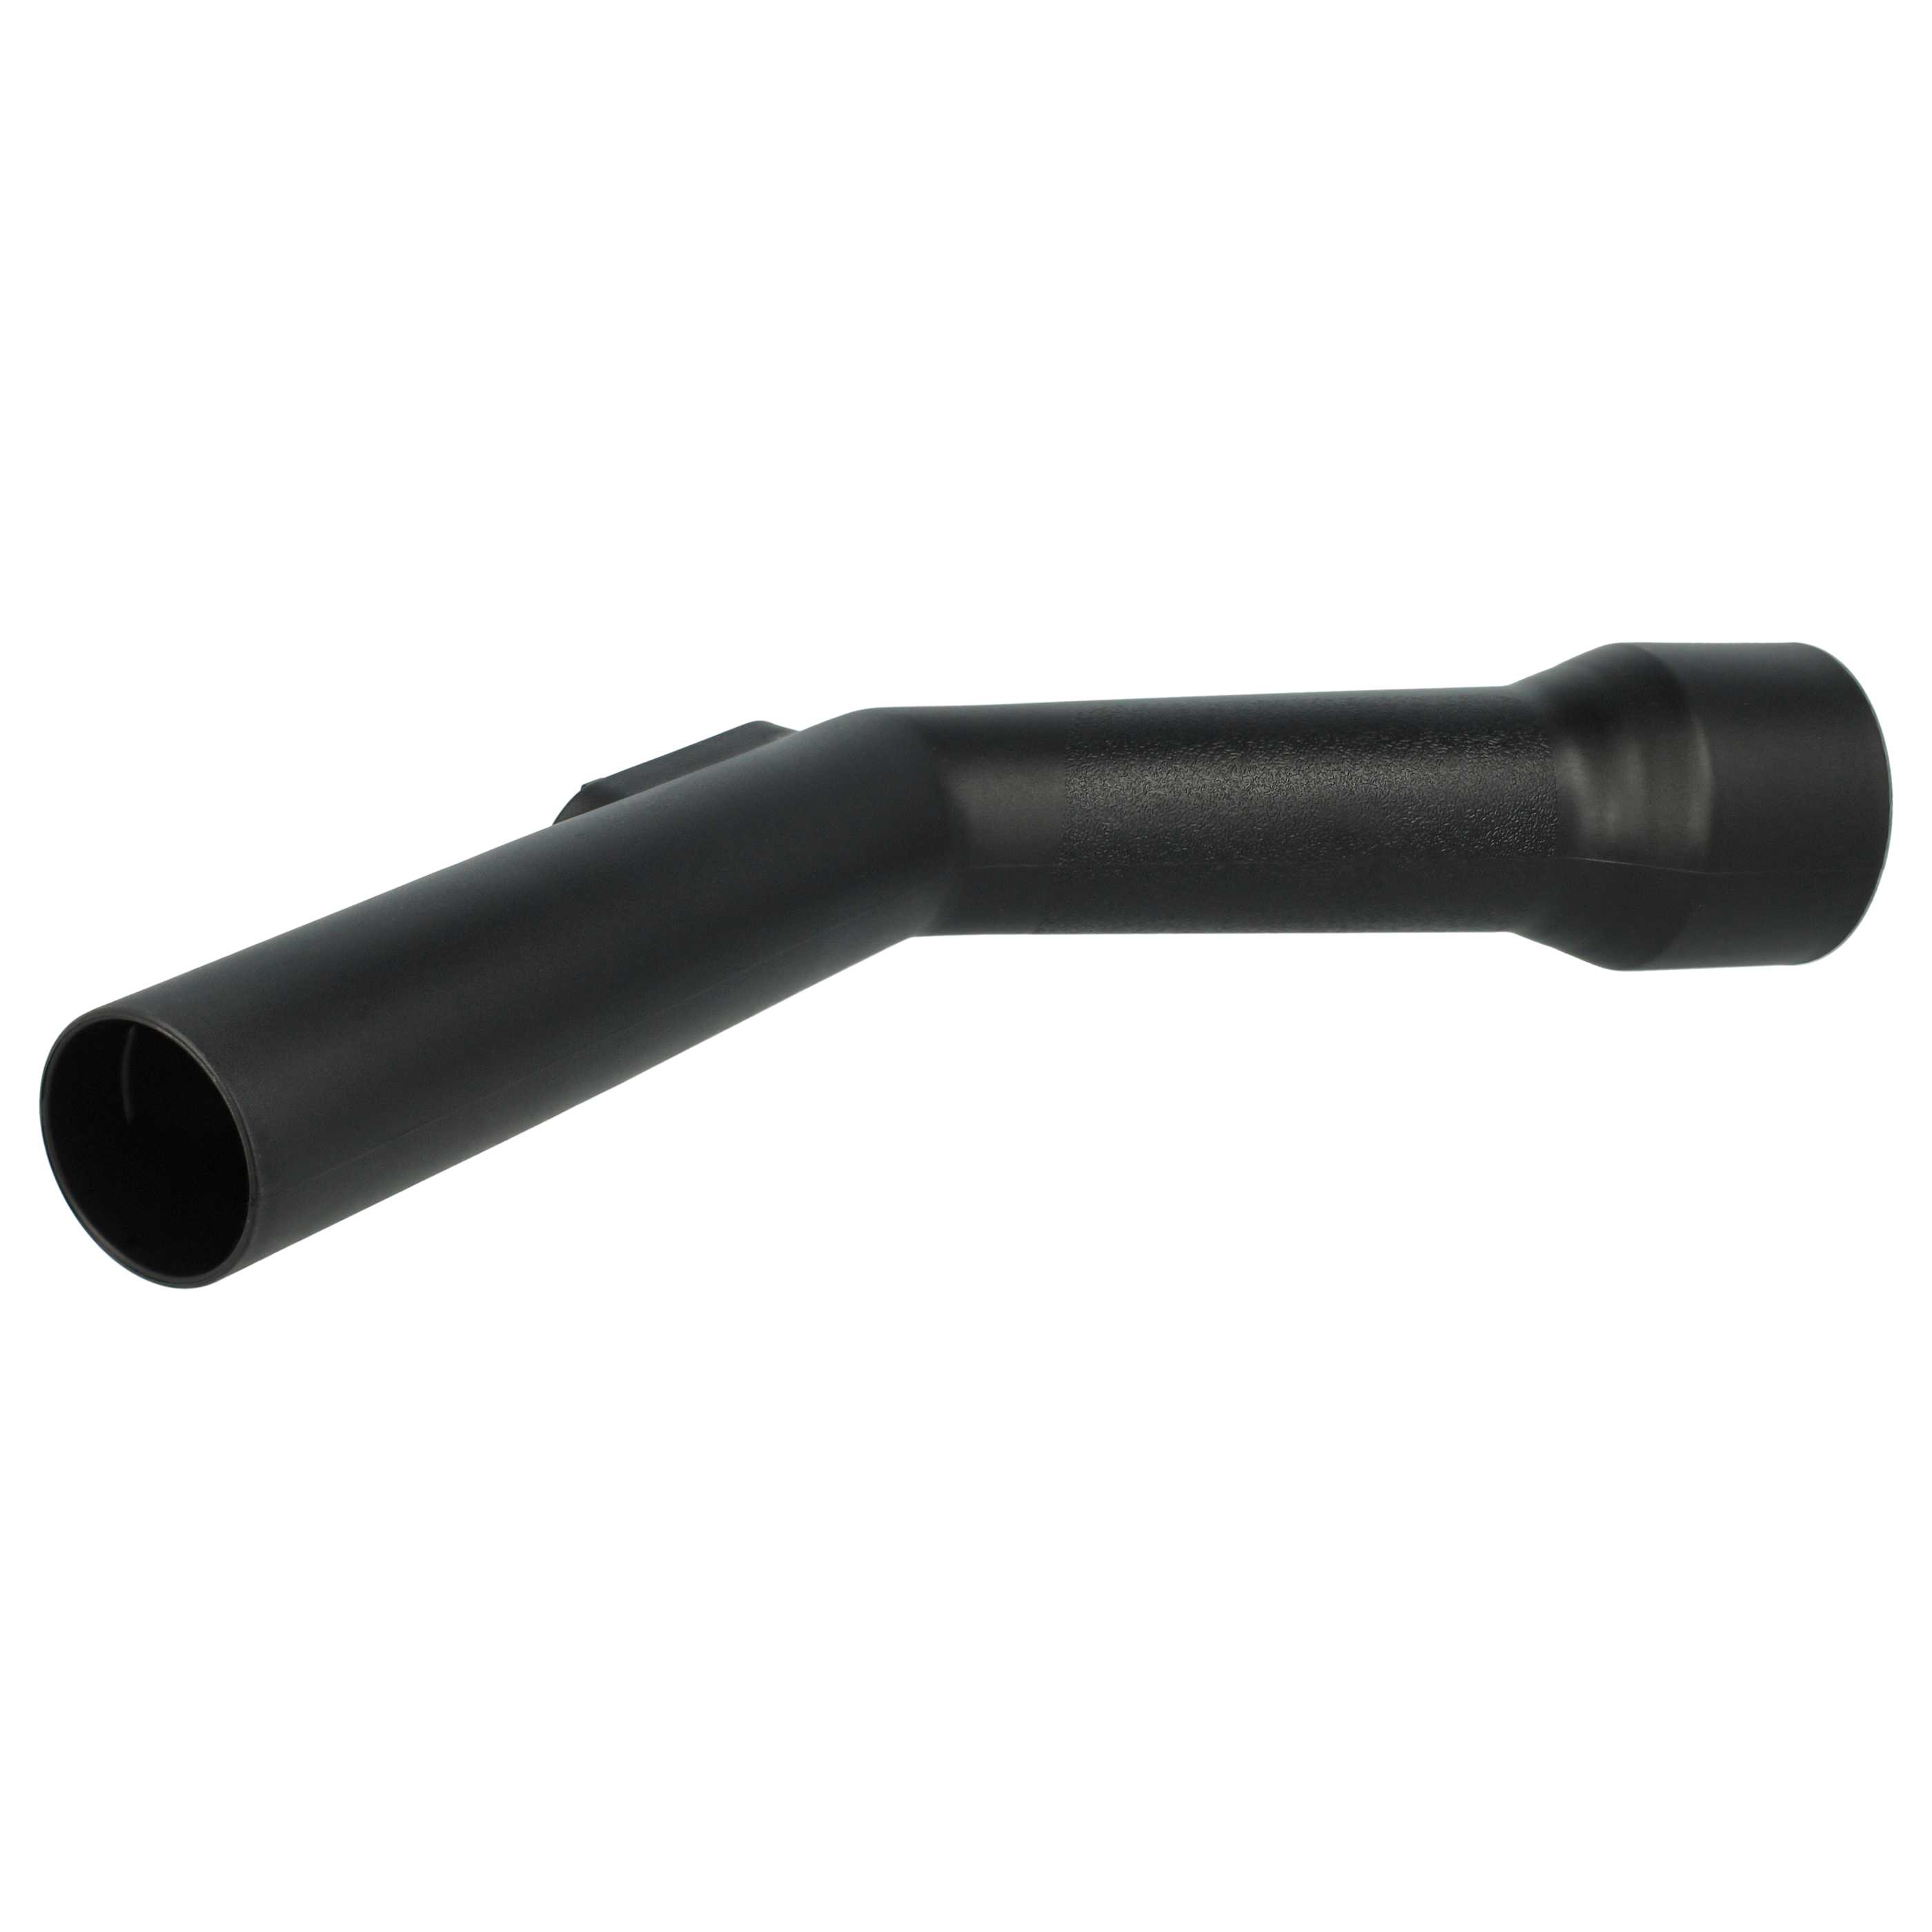 Vacuum Cleaner Handle as Replacement for Miele Vacuum Cleaner Handle 526909194426003565460